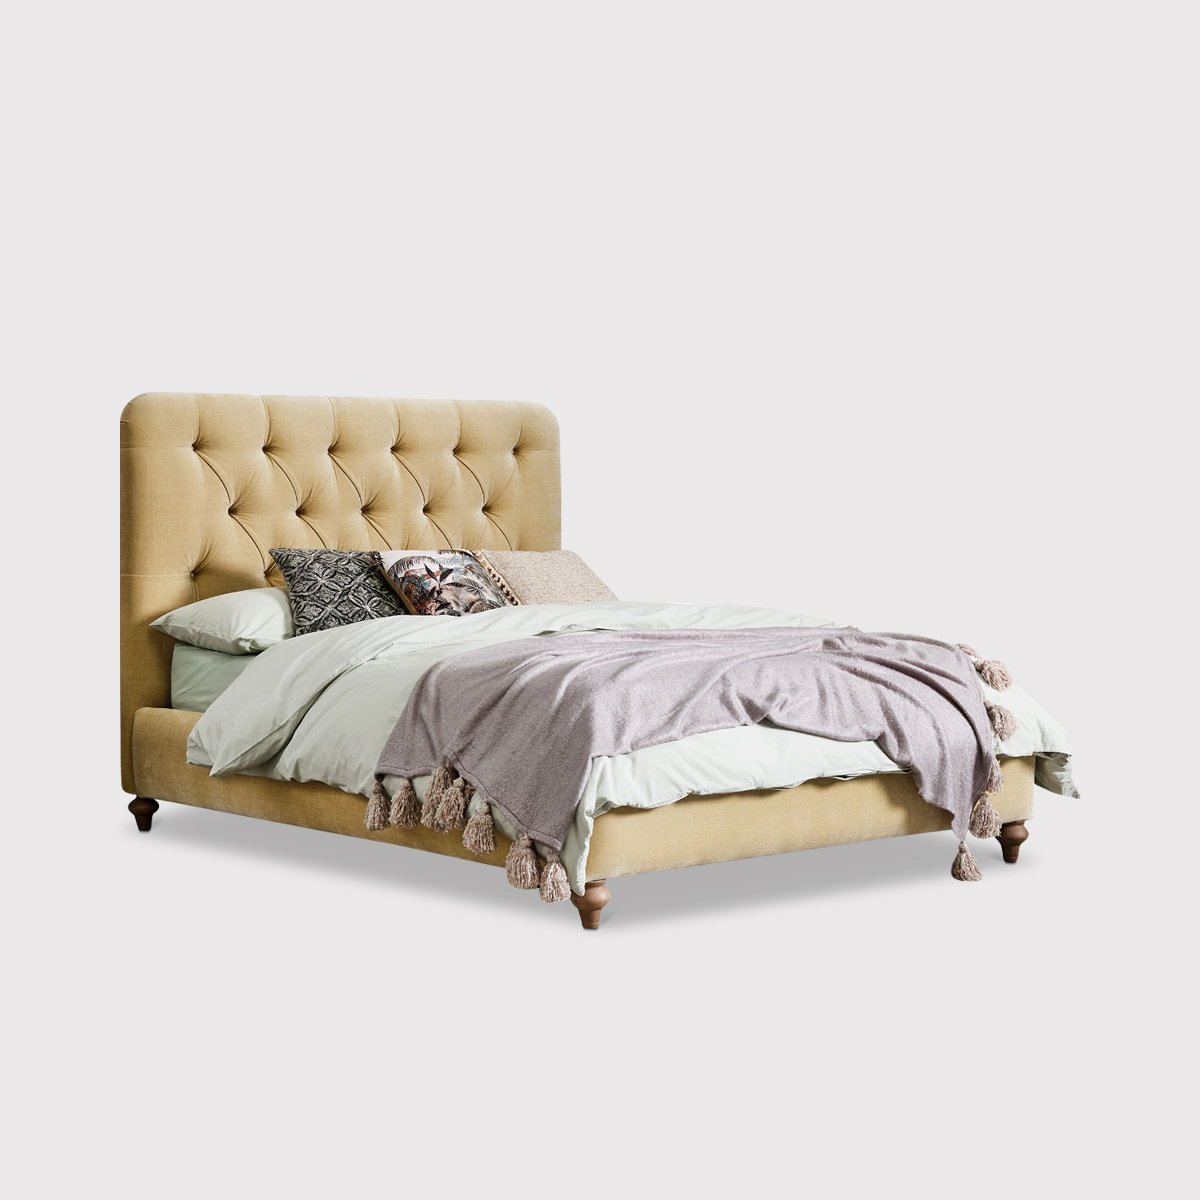 Delphine King Bed Frame, Yellow | Barker & Stonehouse